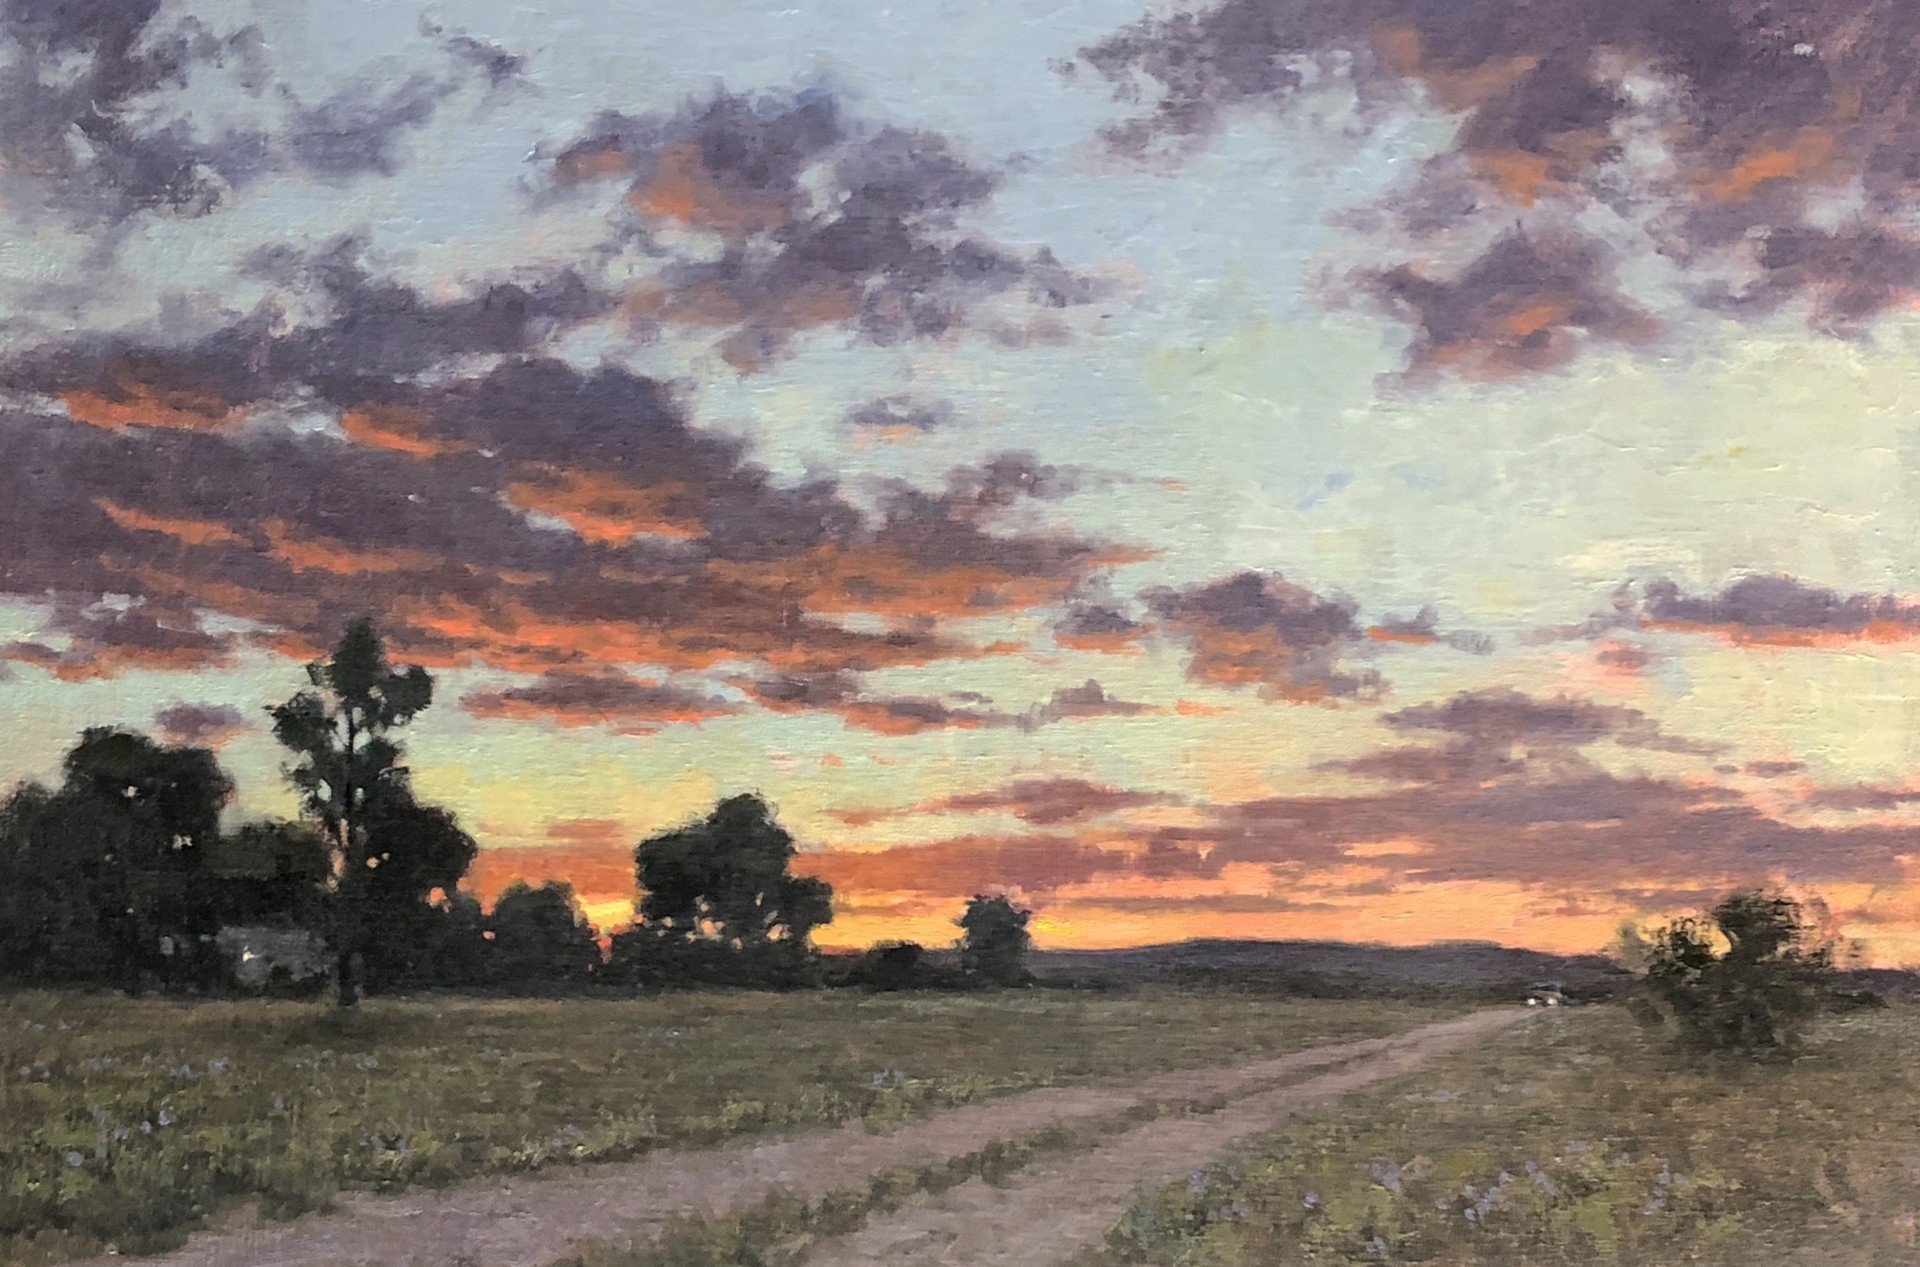 The Road and the Sky by Bill Farnsworth